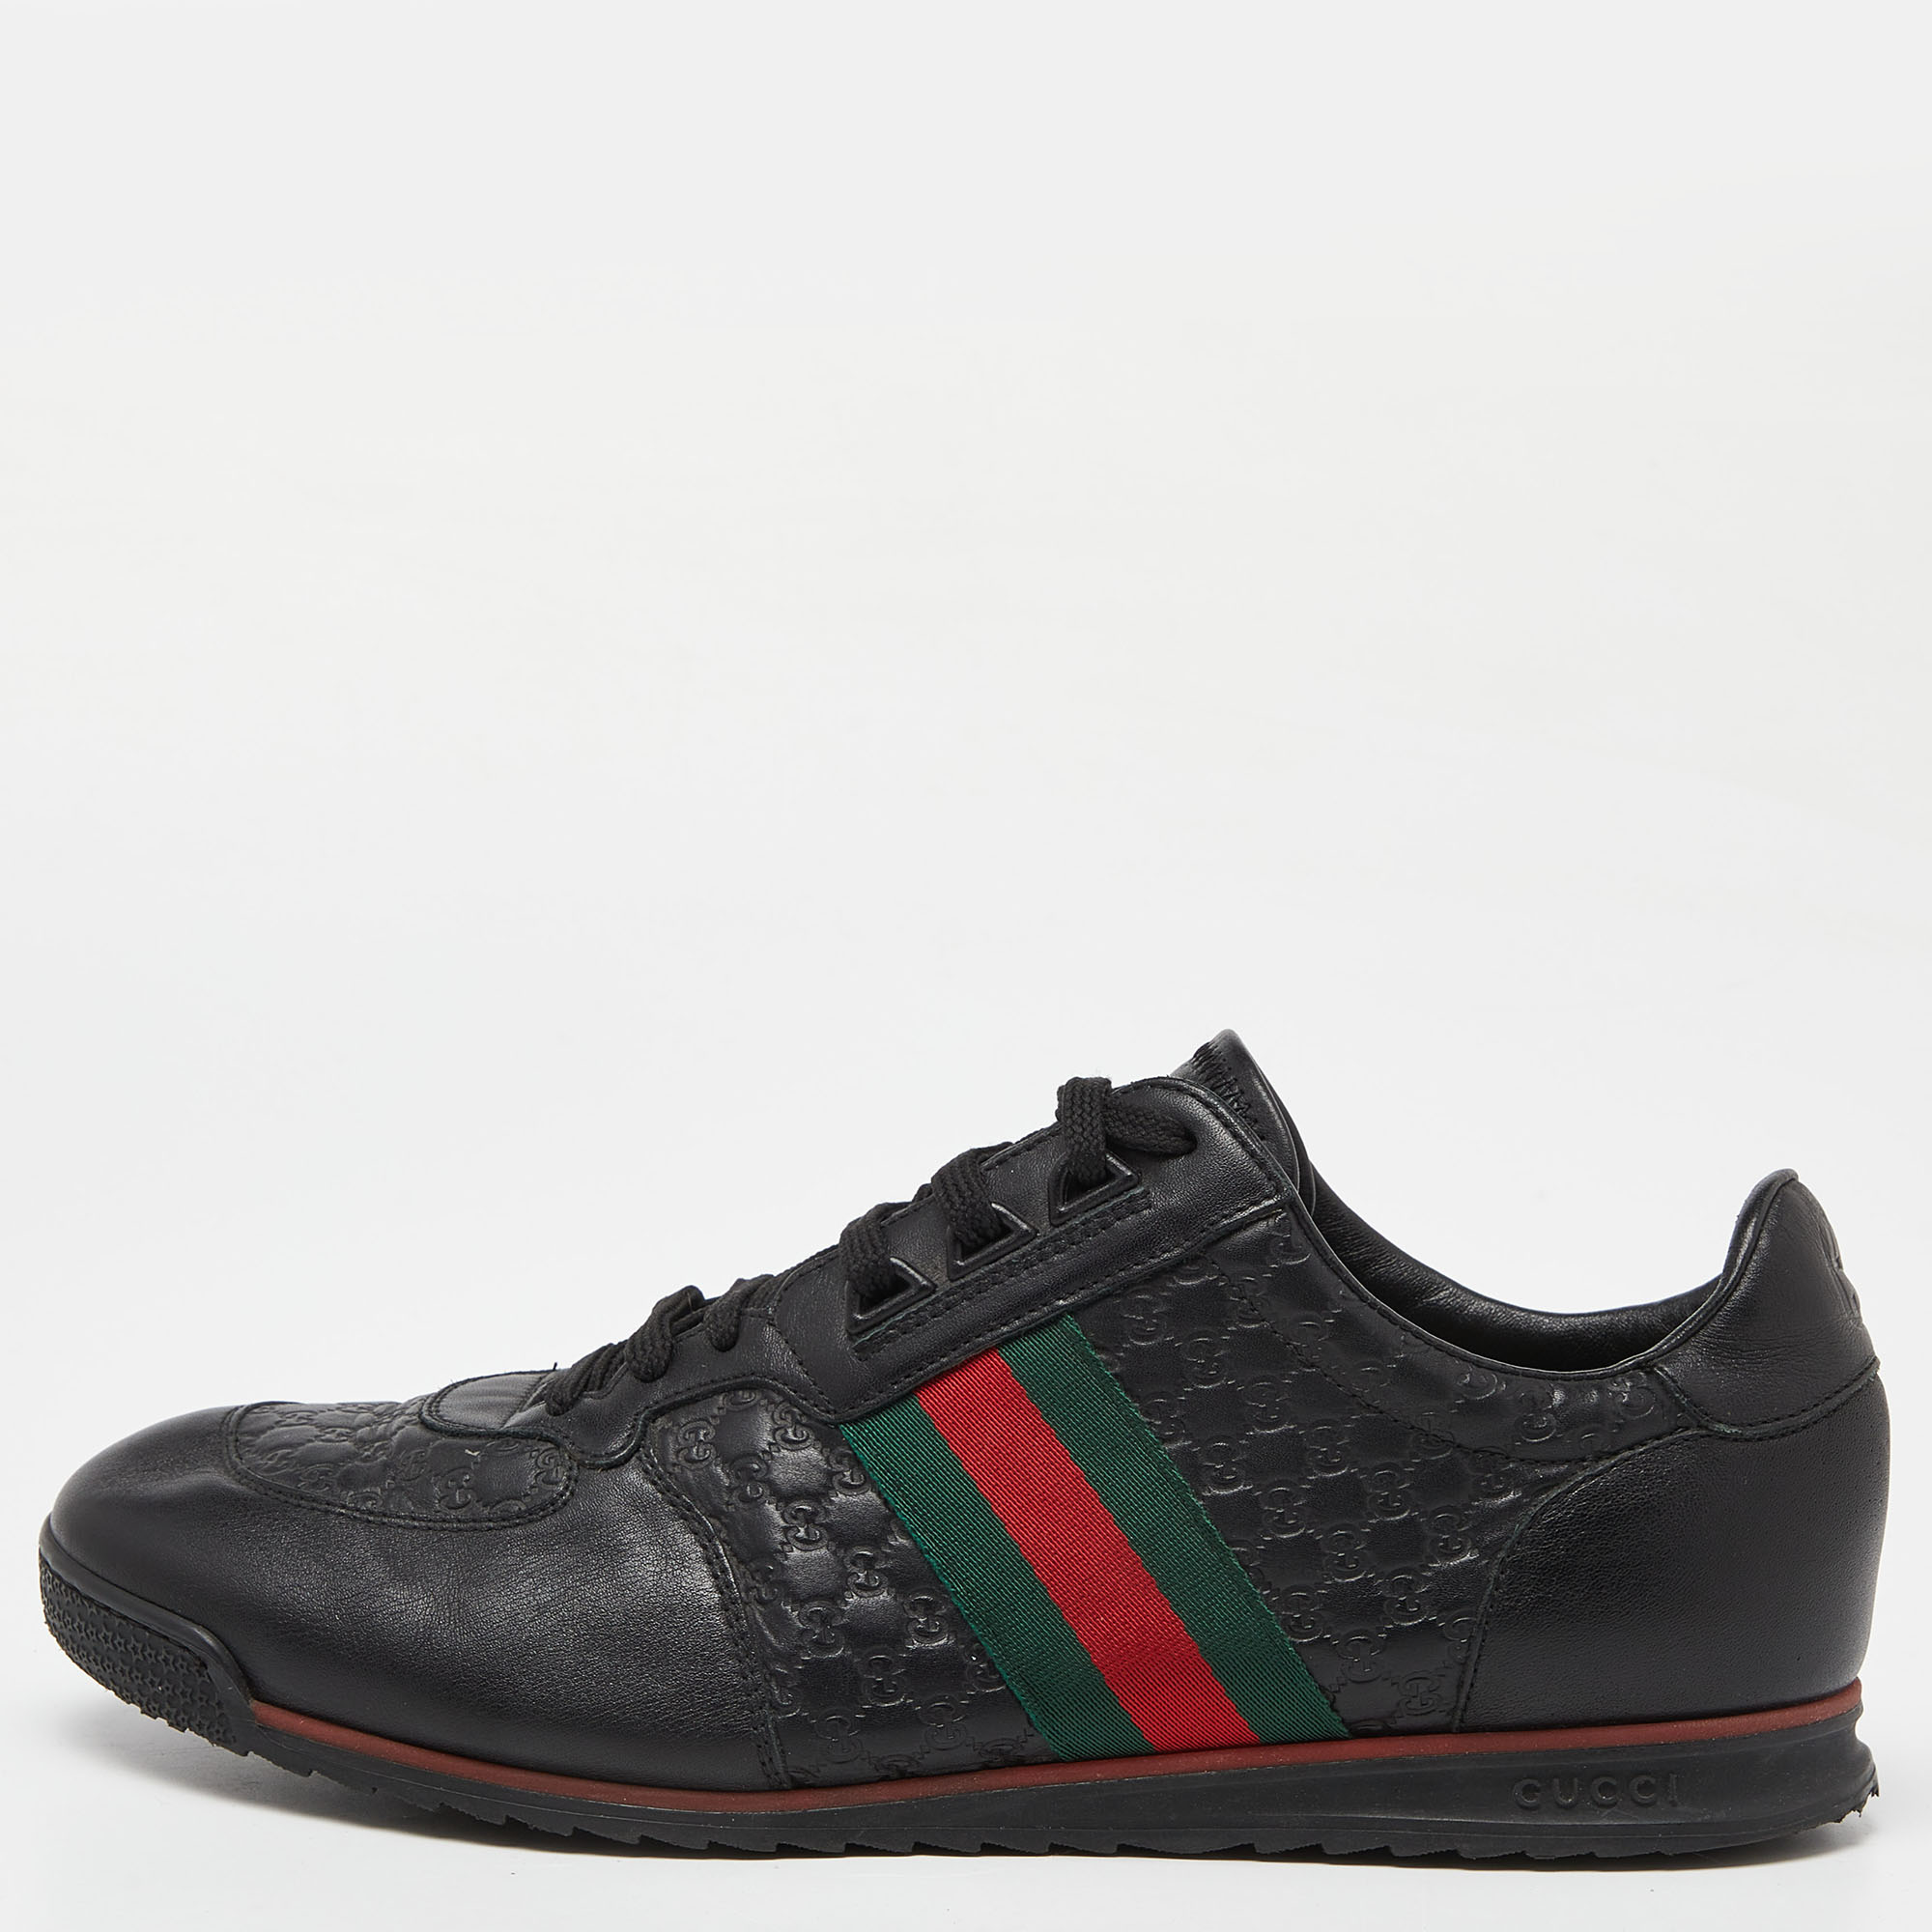 Gucci black guccissima leather web low top sneakers size 44.5